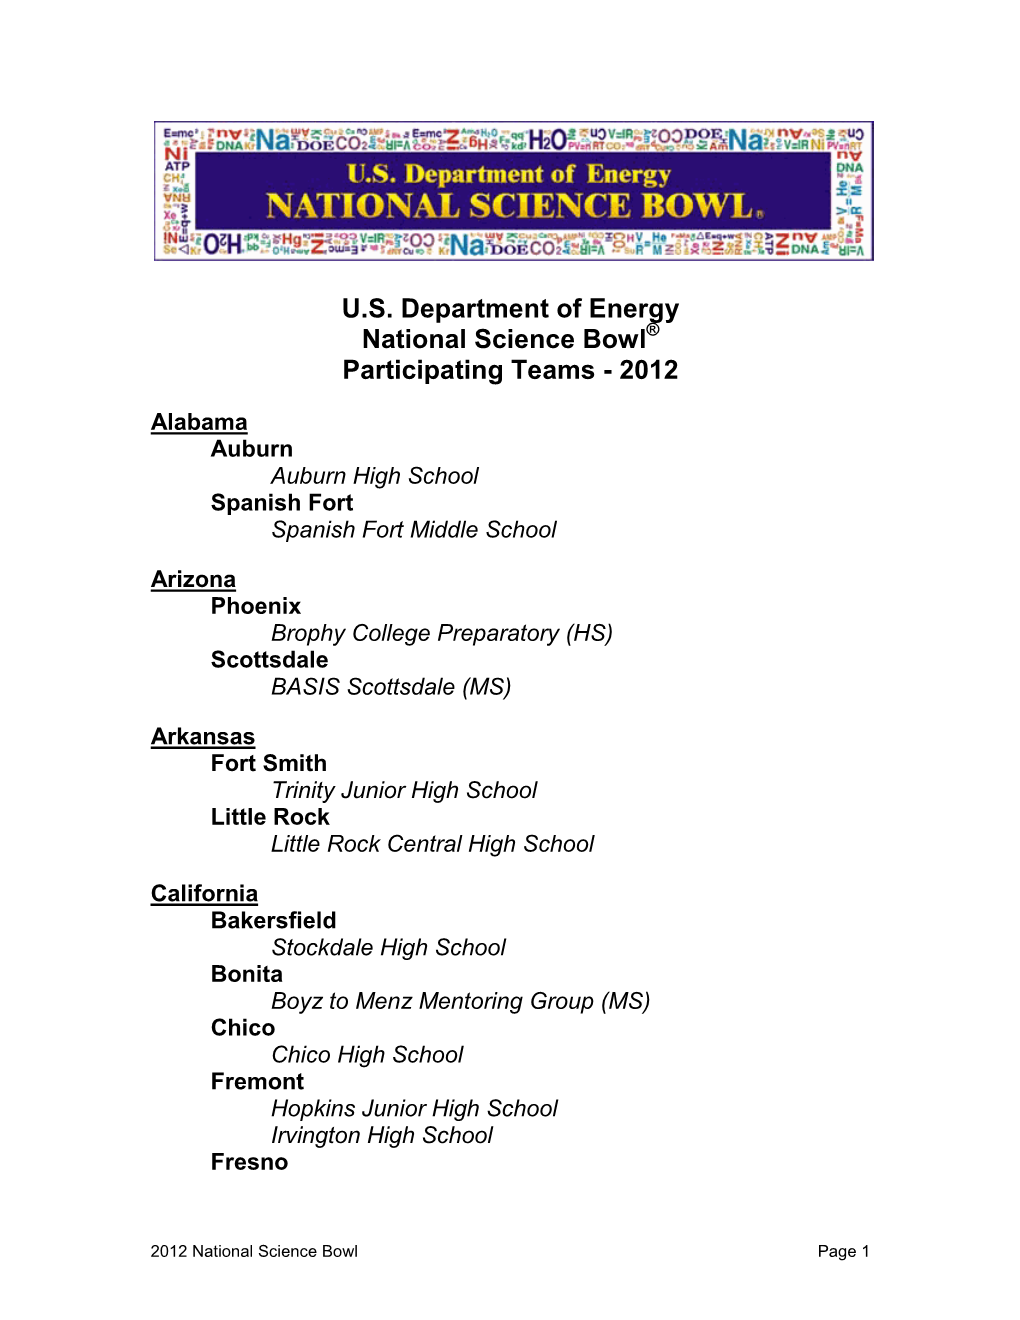 U.S. Department of Energy National Science Bowl Participating Teams